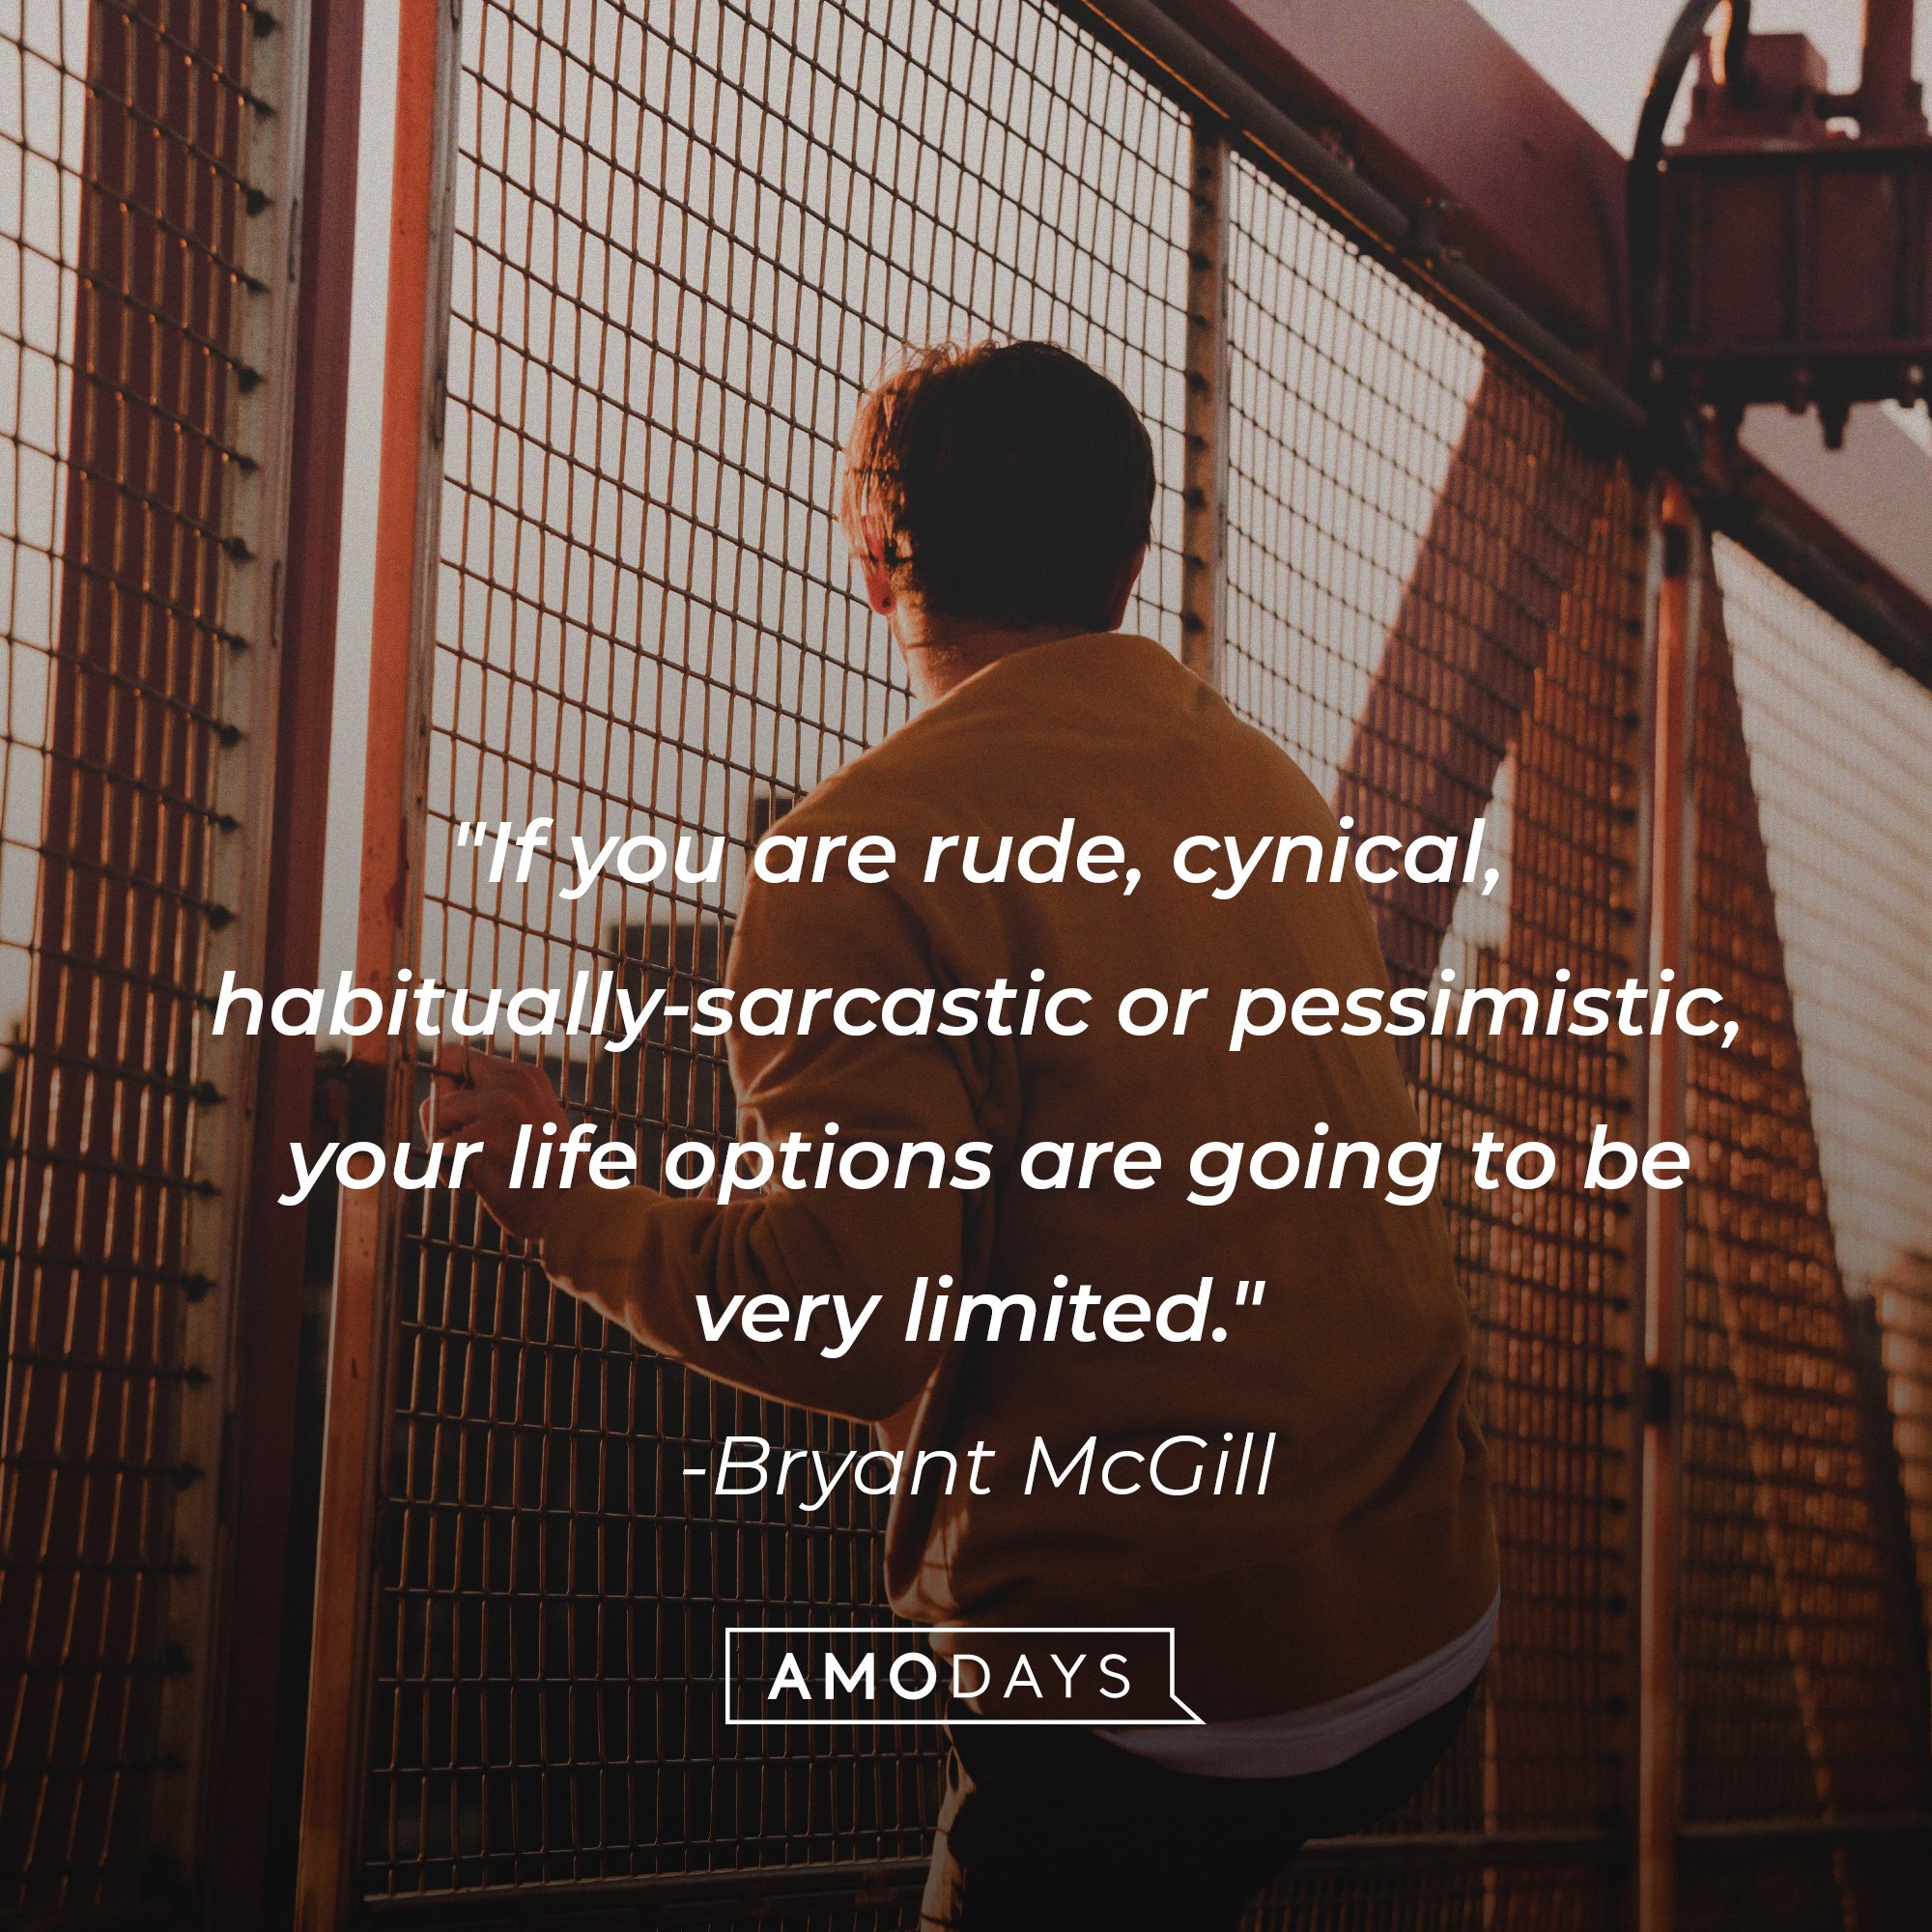  Bryant McGill’s quote: "If you are rude, cynical, habitually-sarcastic or pessimistic, your life options are going to be very limited." | Image: AmoDays